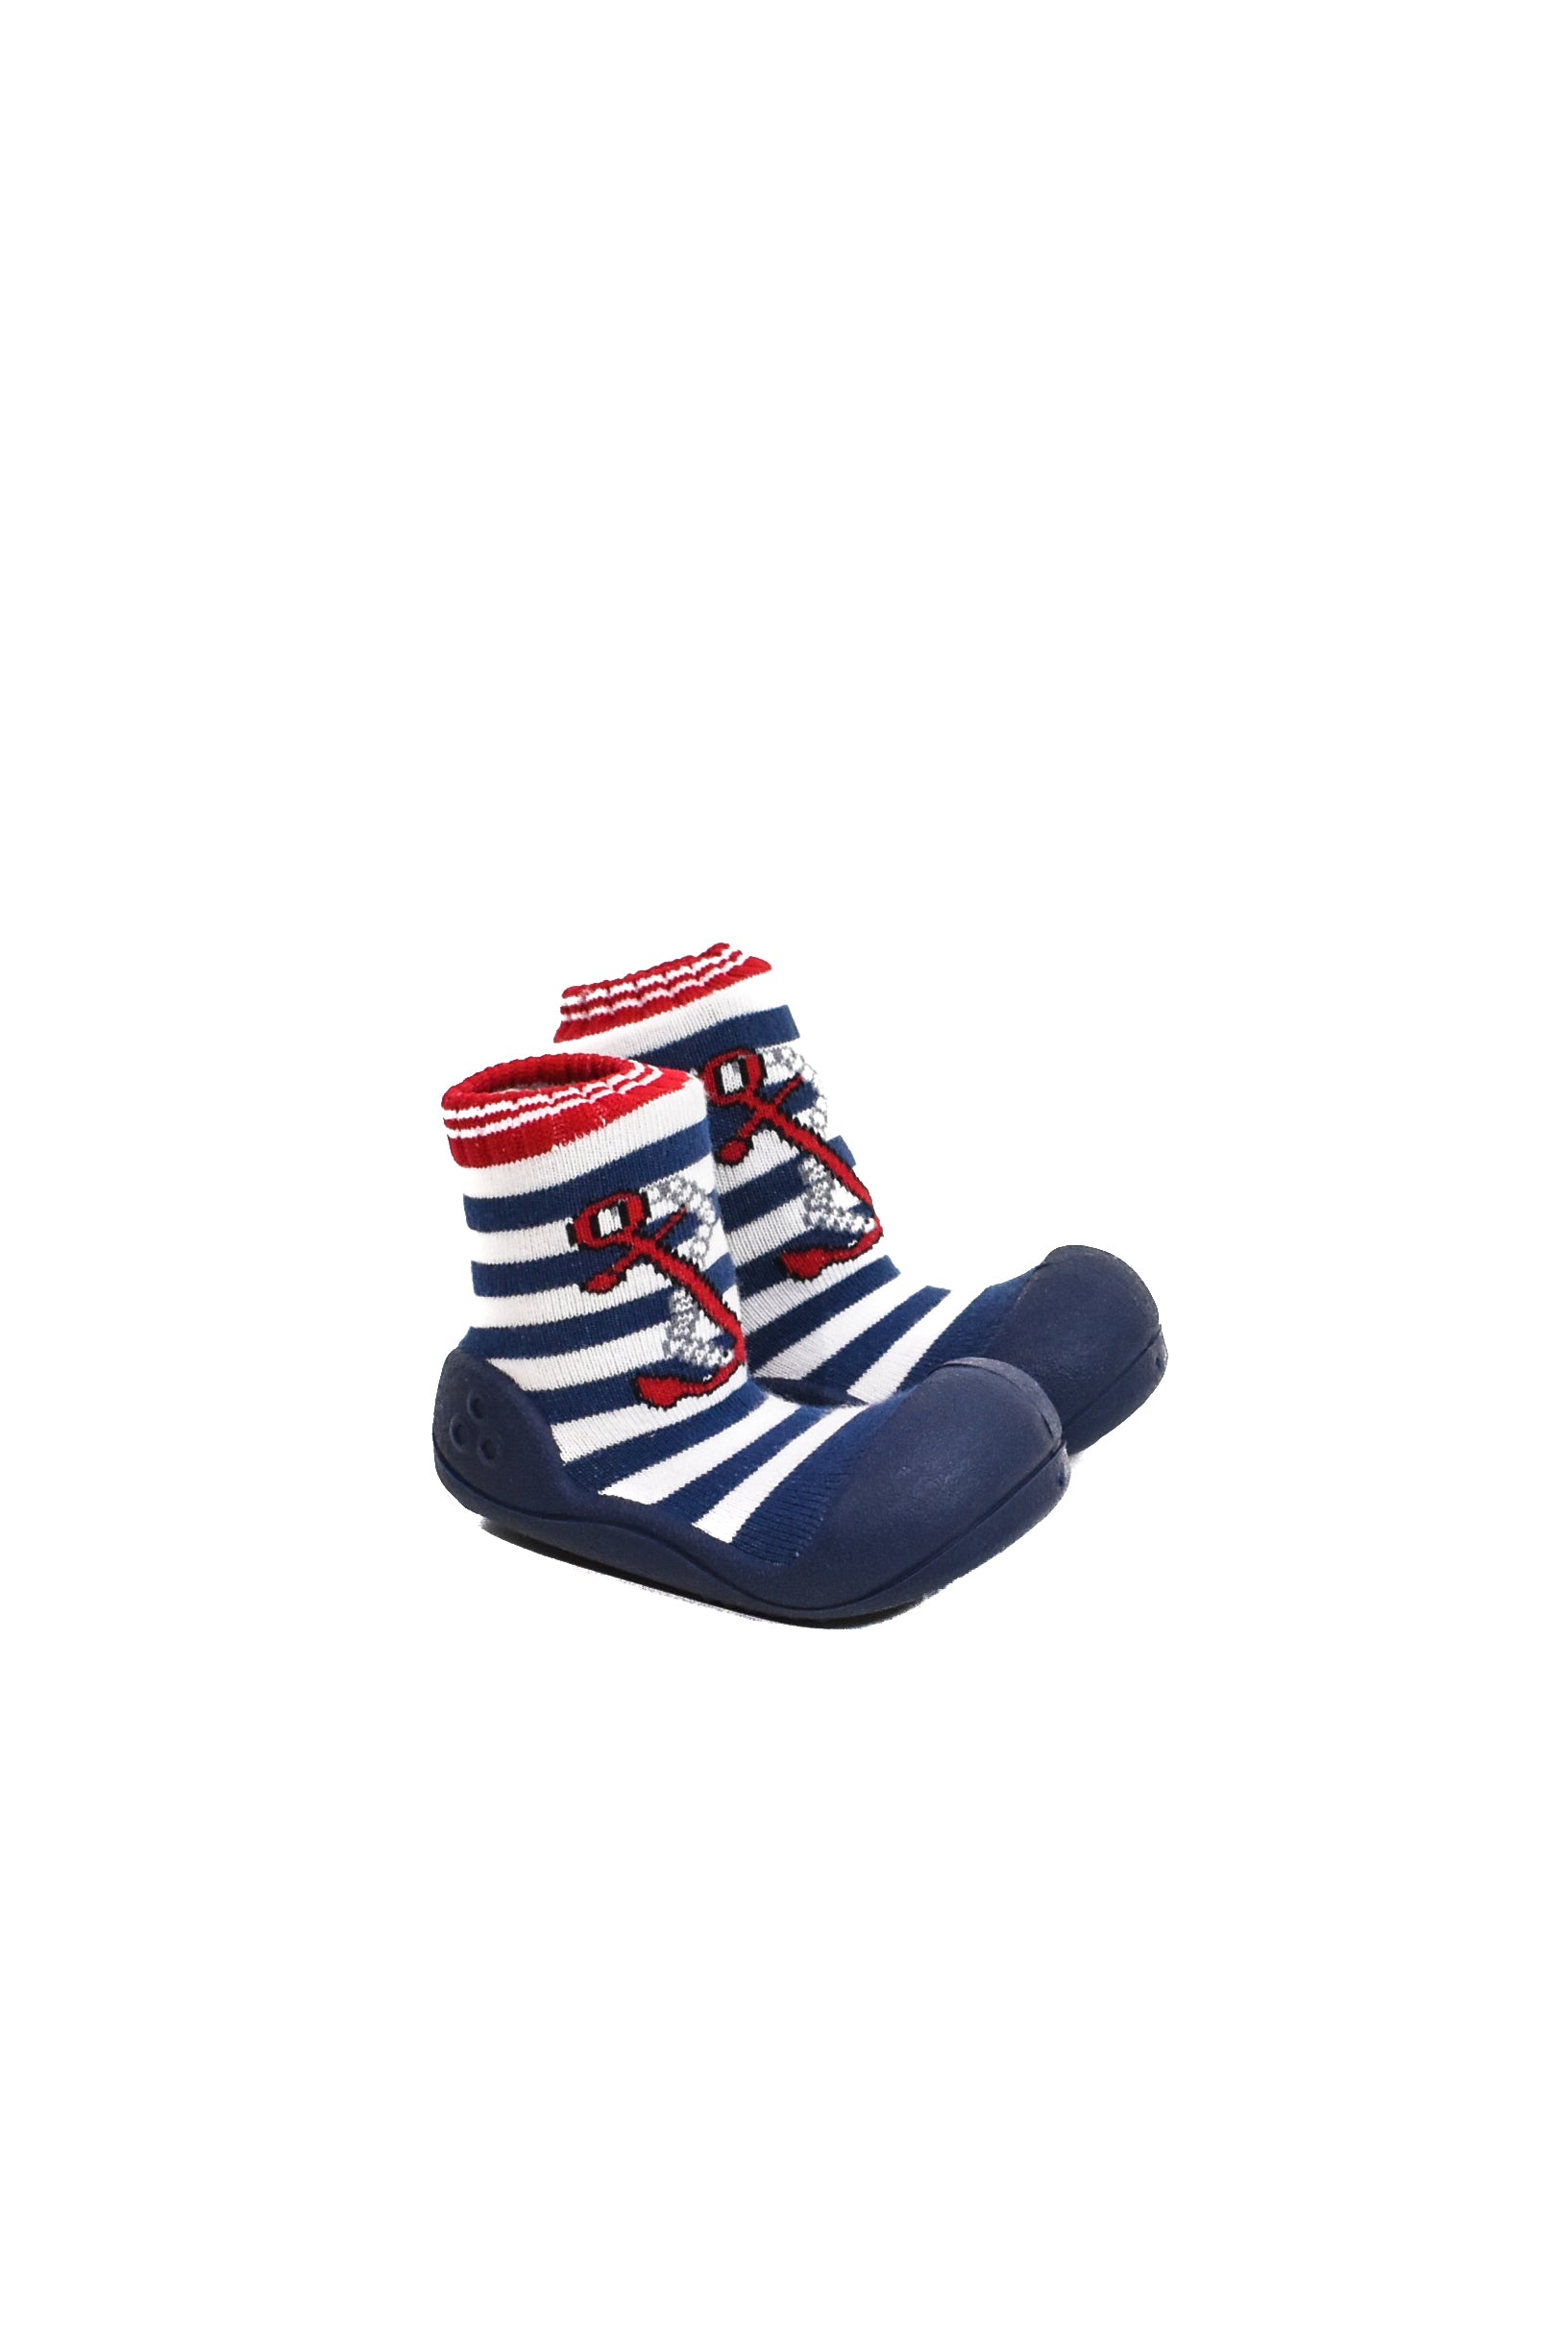 appitas baby shoes